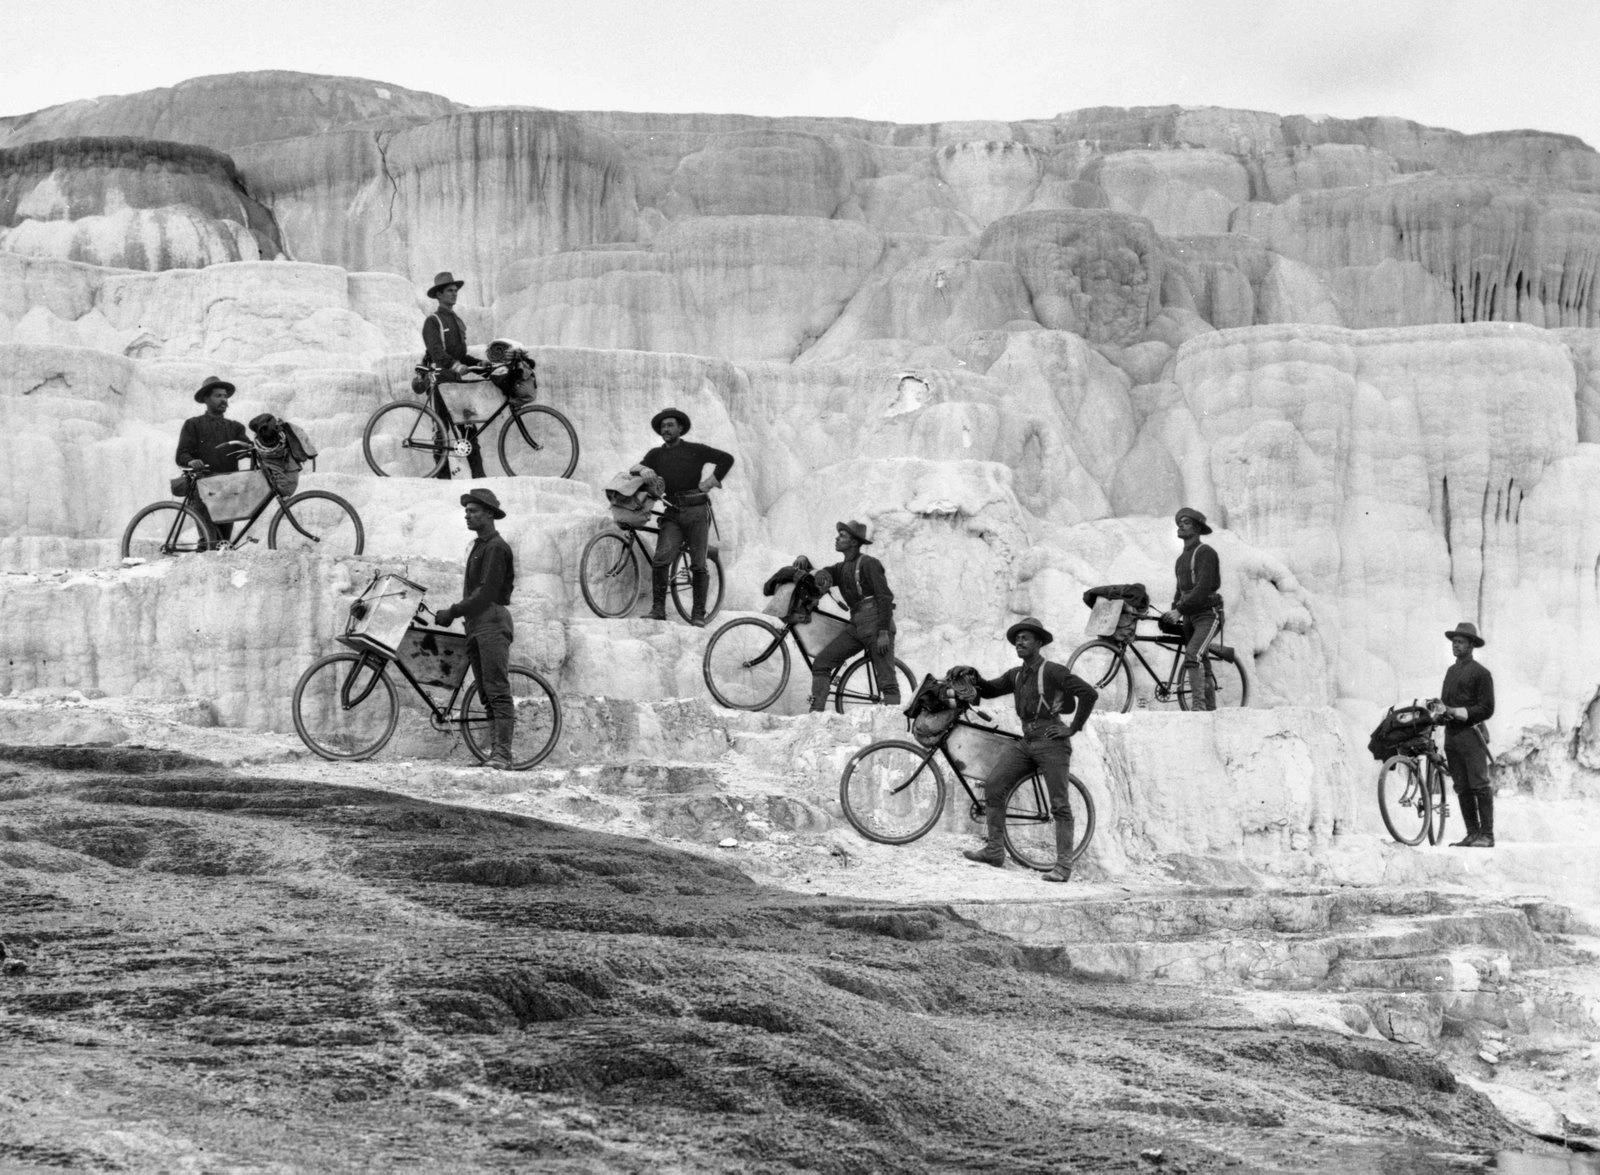 Members of a cavalry unit known as the Buffalo Soldiers ride their frontier bicycles onto the fragile travertine at Minerva Terrace in Yellowstone.